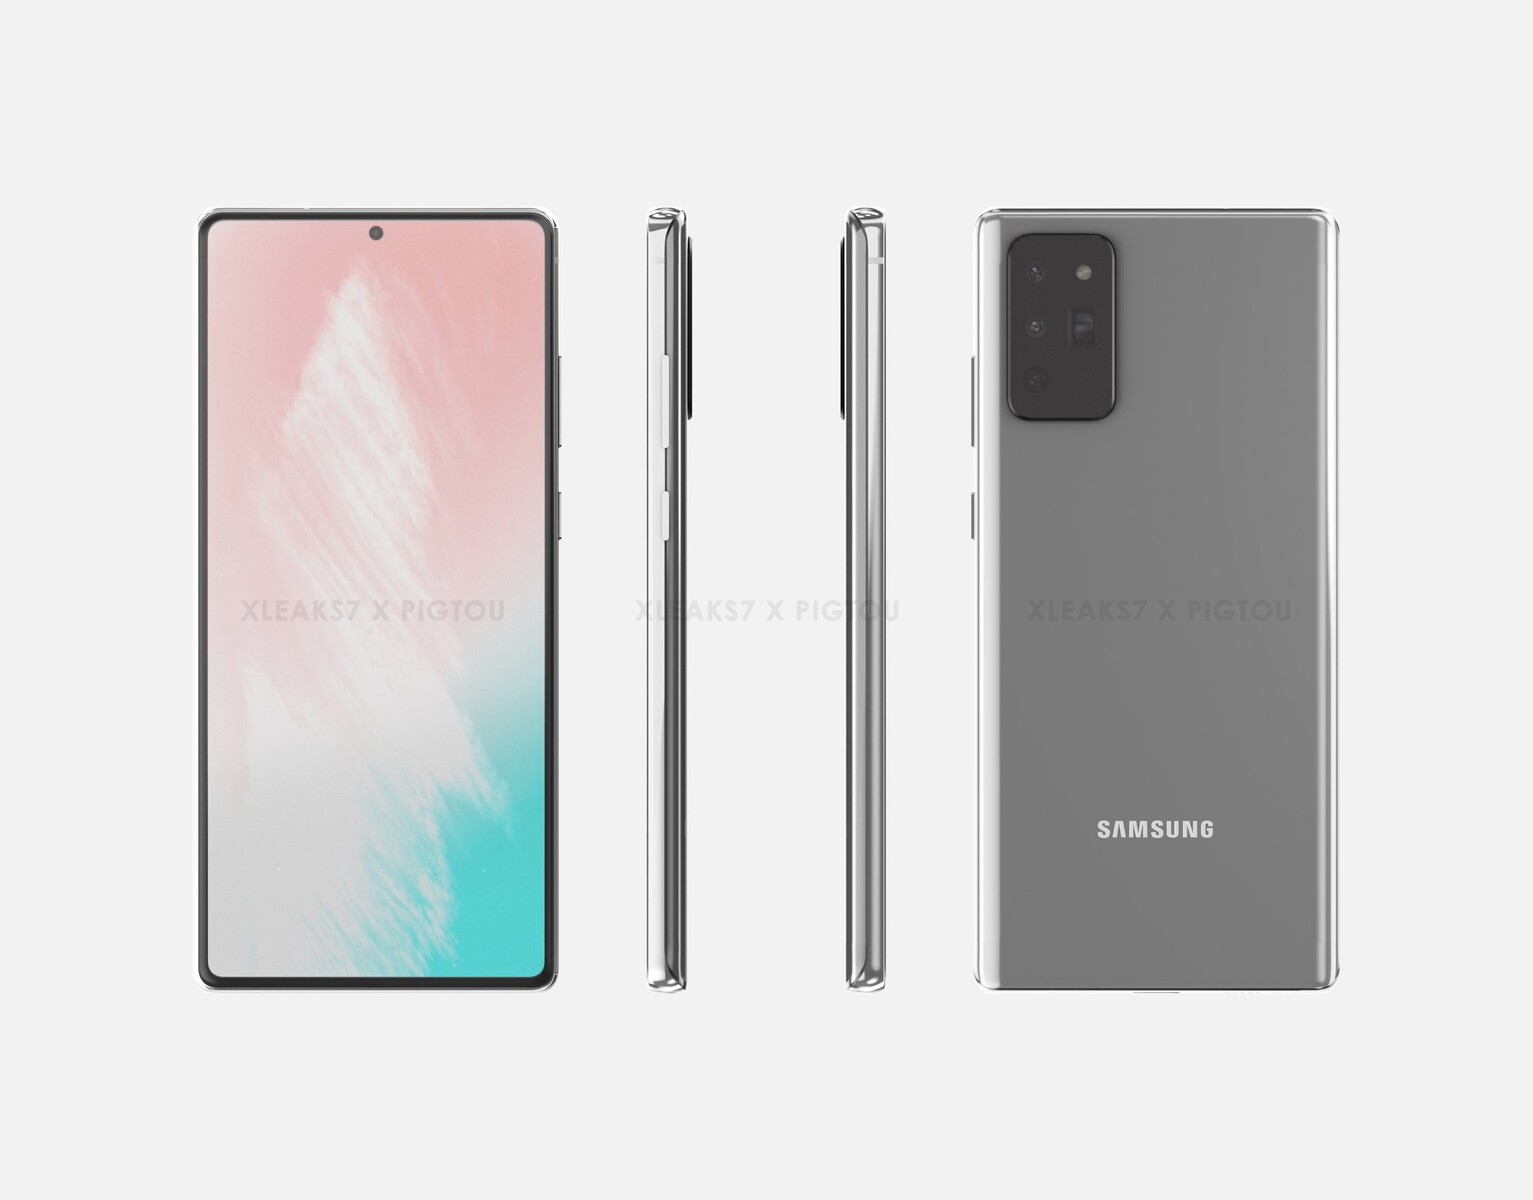 Samsung Galaxy Note 10 Plus 5G launch date revealed in final press renders  - BusinessToday